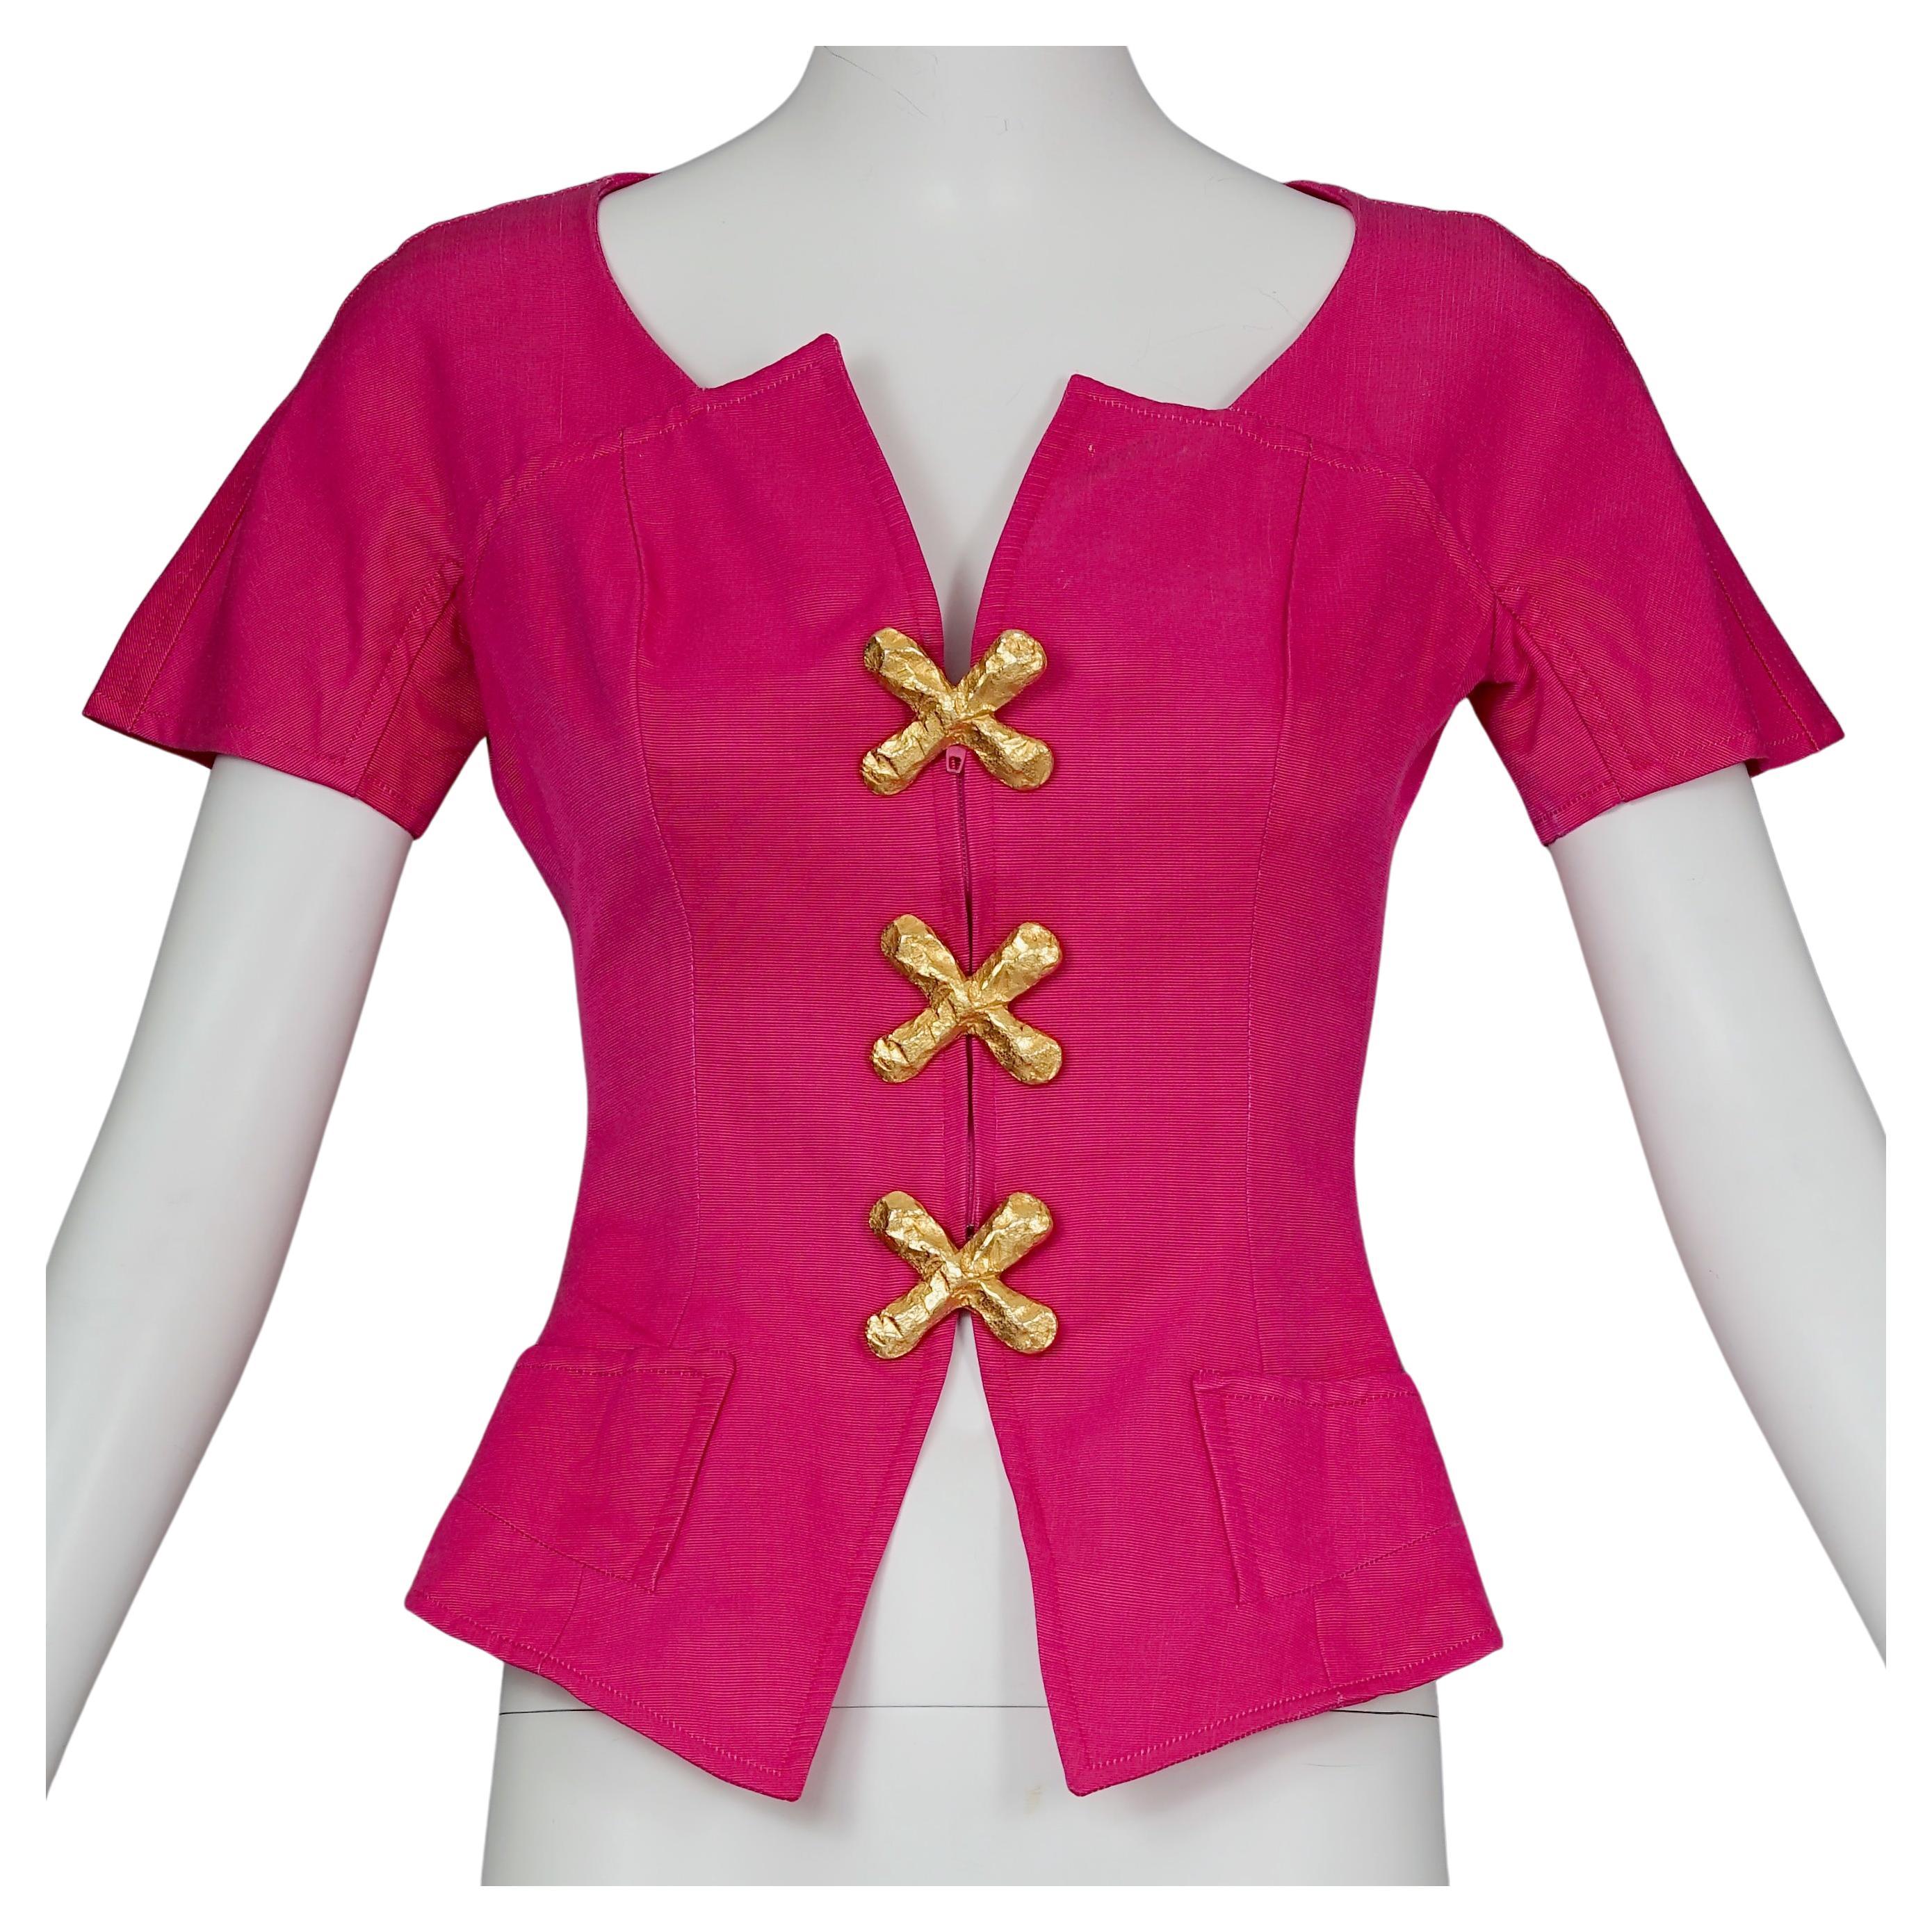 Vintage CRISTIAN LACROIX Jewelled Fuchsia Pink Blouse Top For Sale